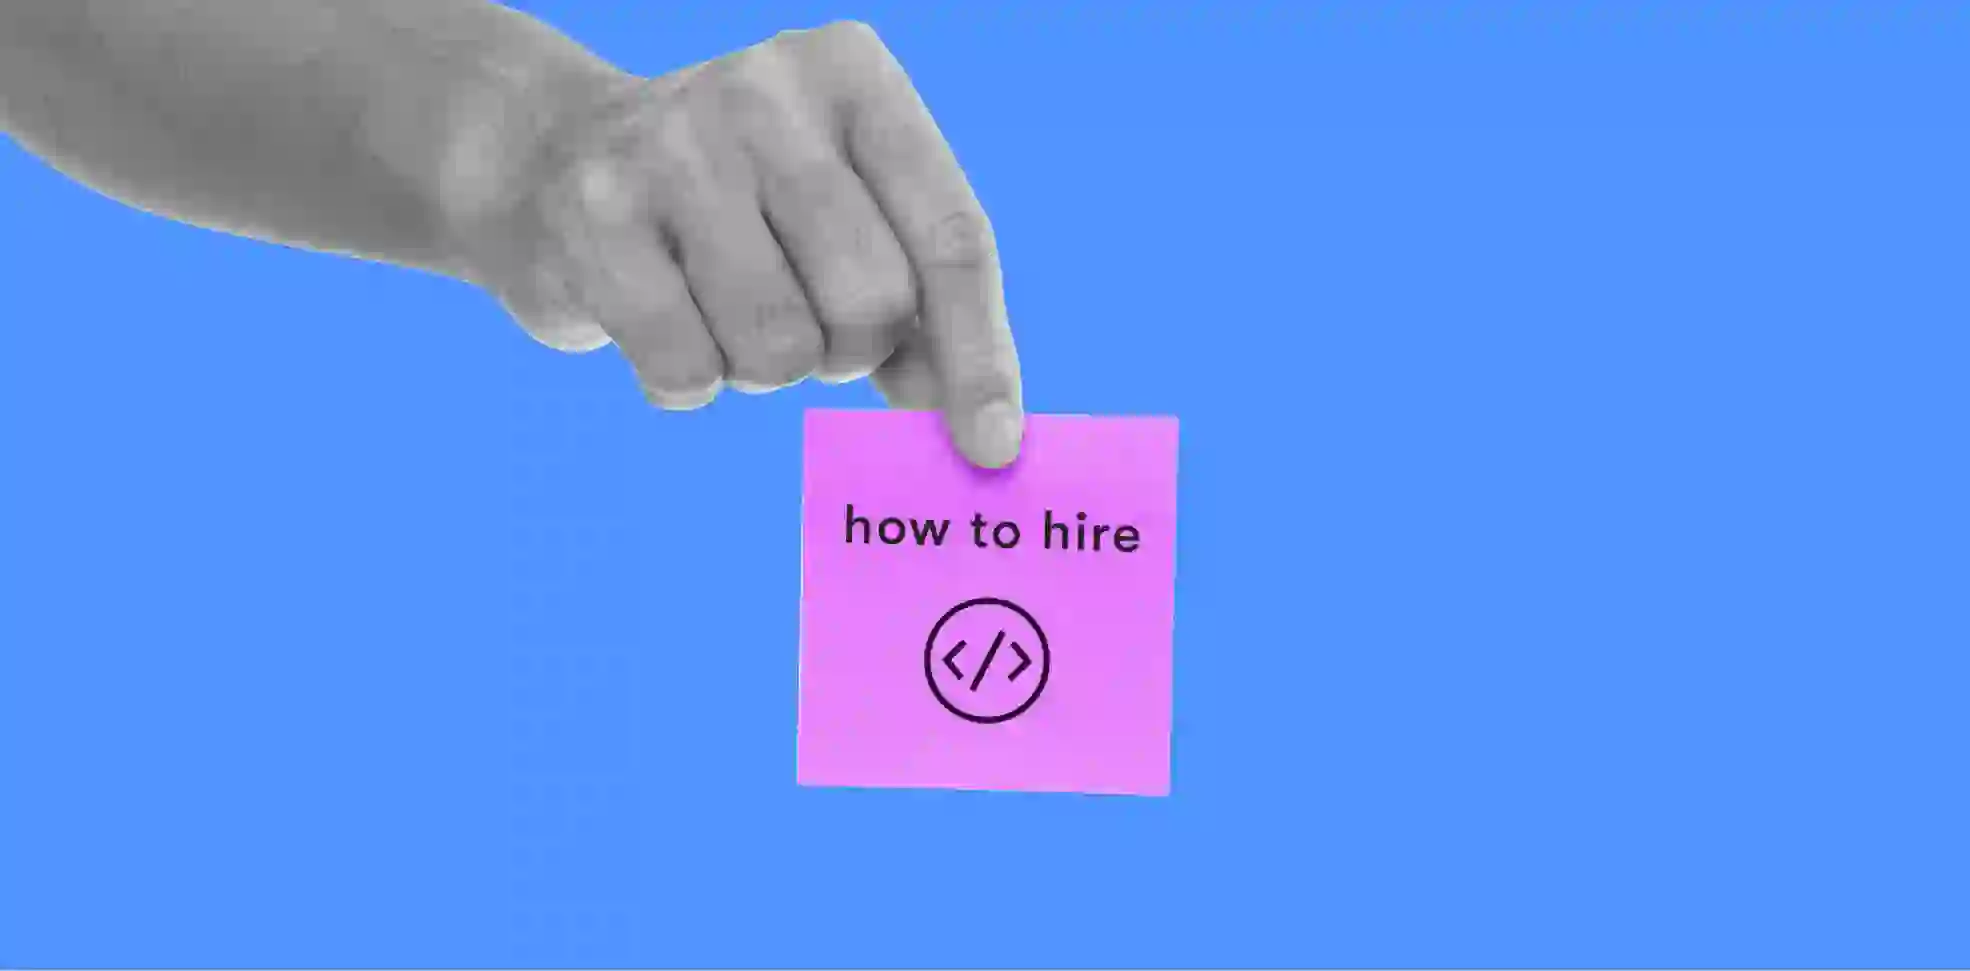 a hand holding a card with the inscription "how to hire"